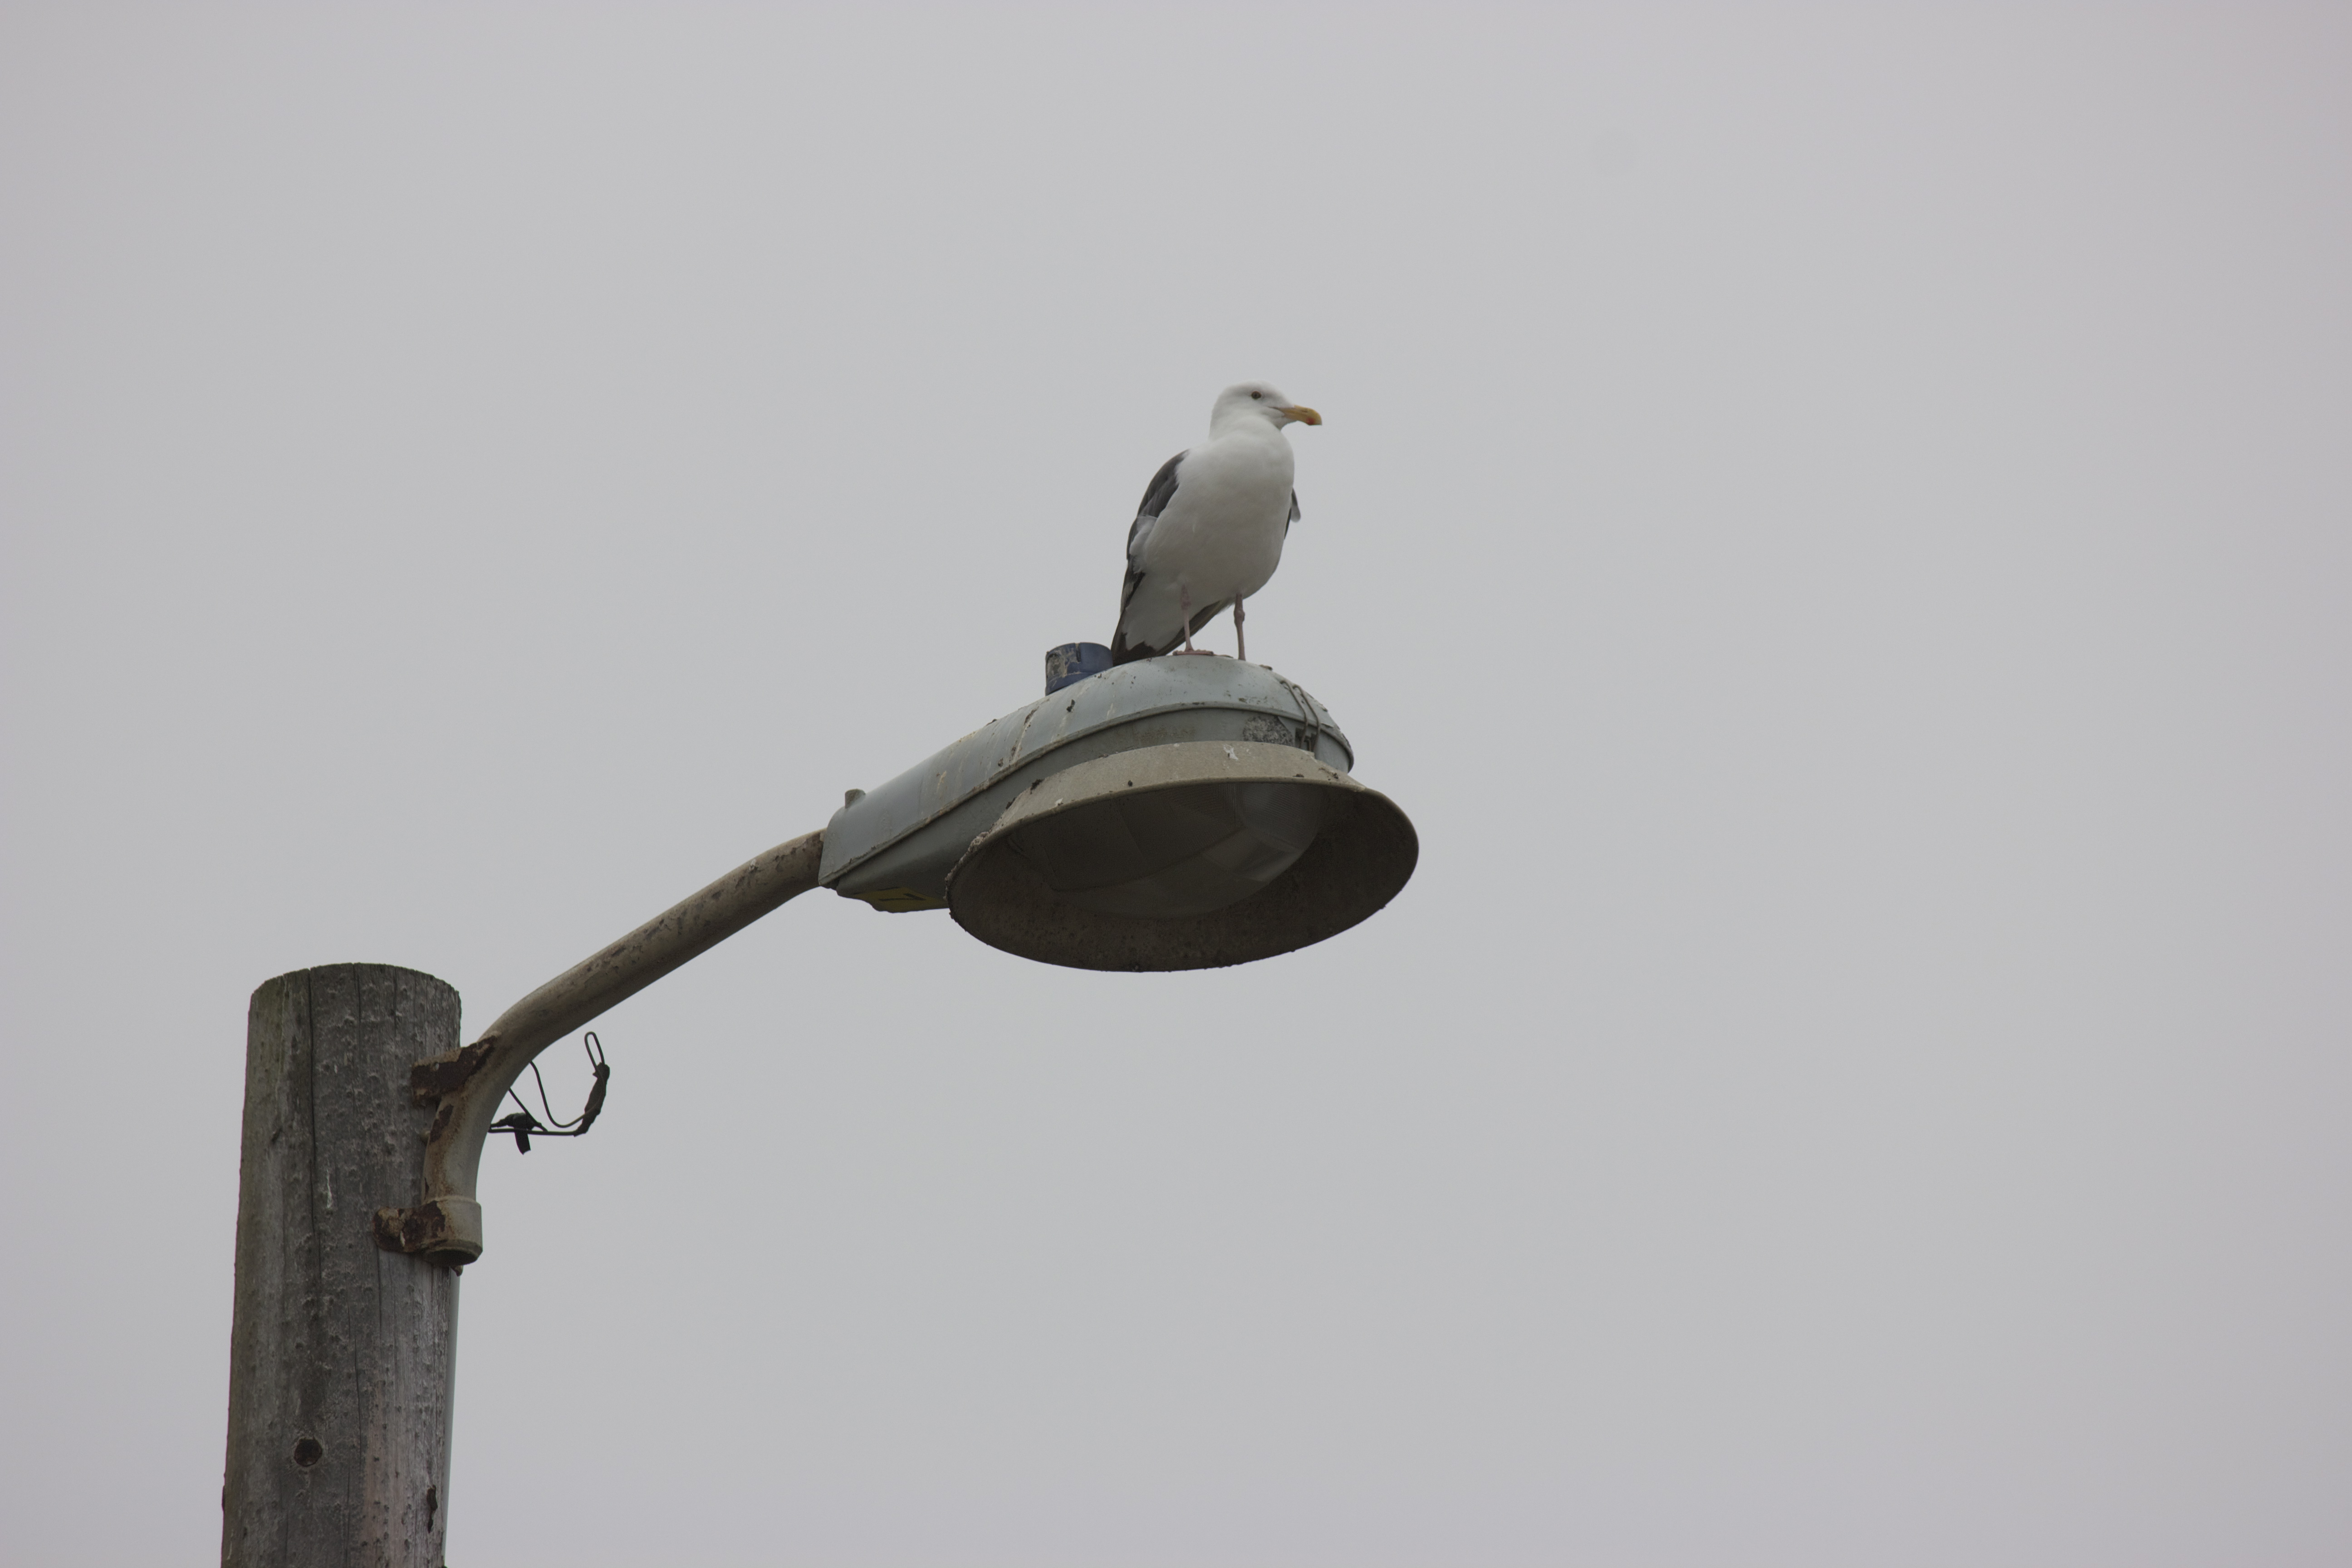 A male seagull perched on a light post against a pale foggy sky.